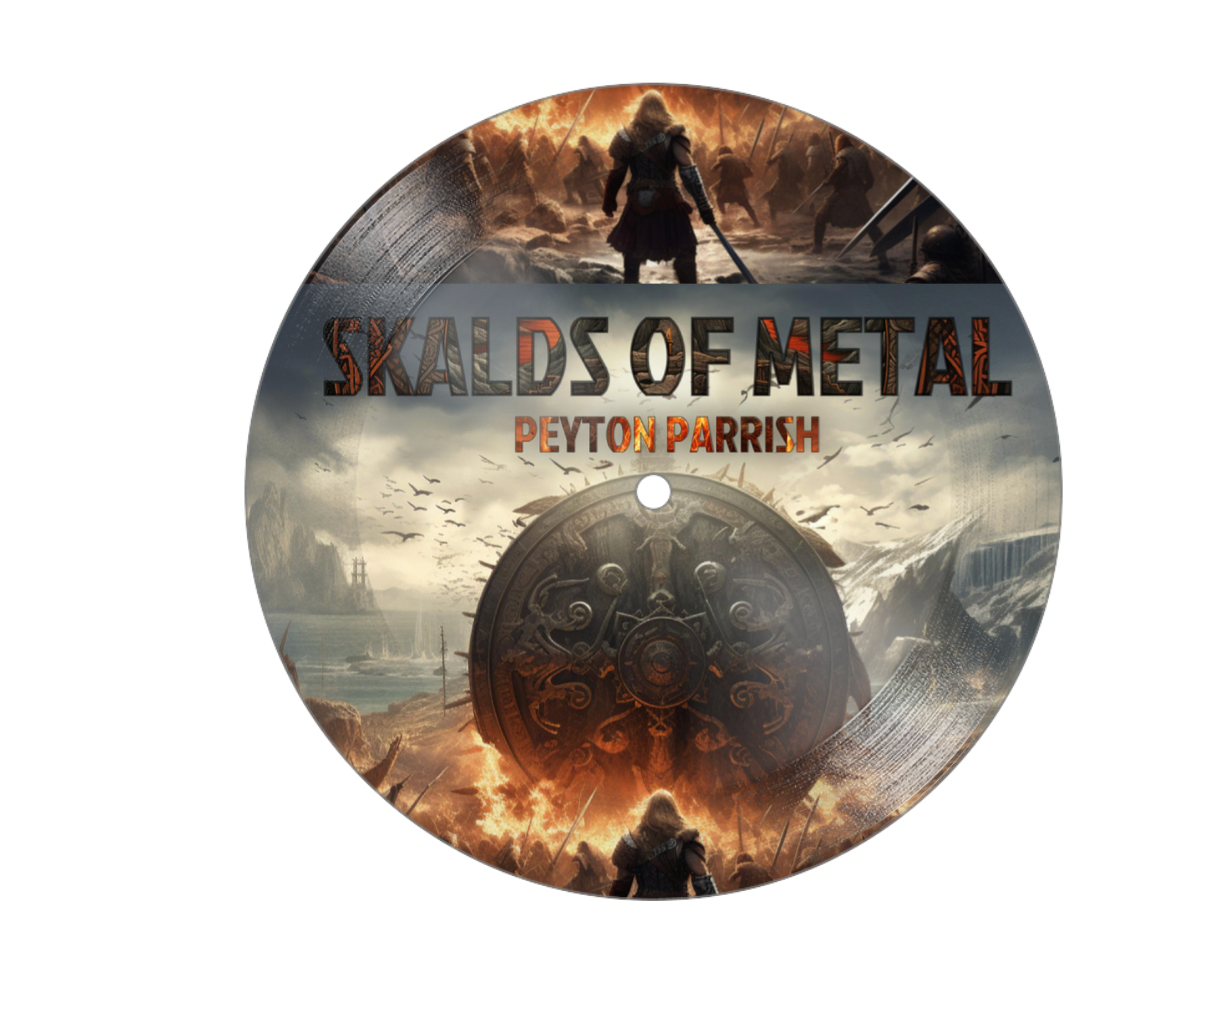 "Skalds Of Metal" - Autographed Vinyl Record (LIMITED RELEASE)